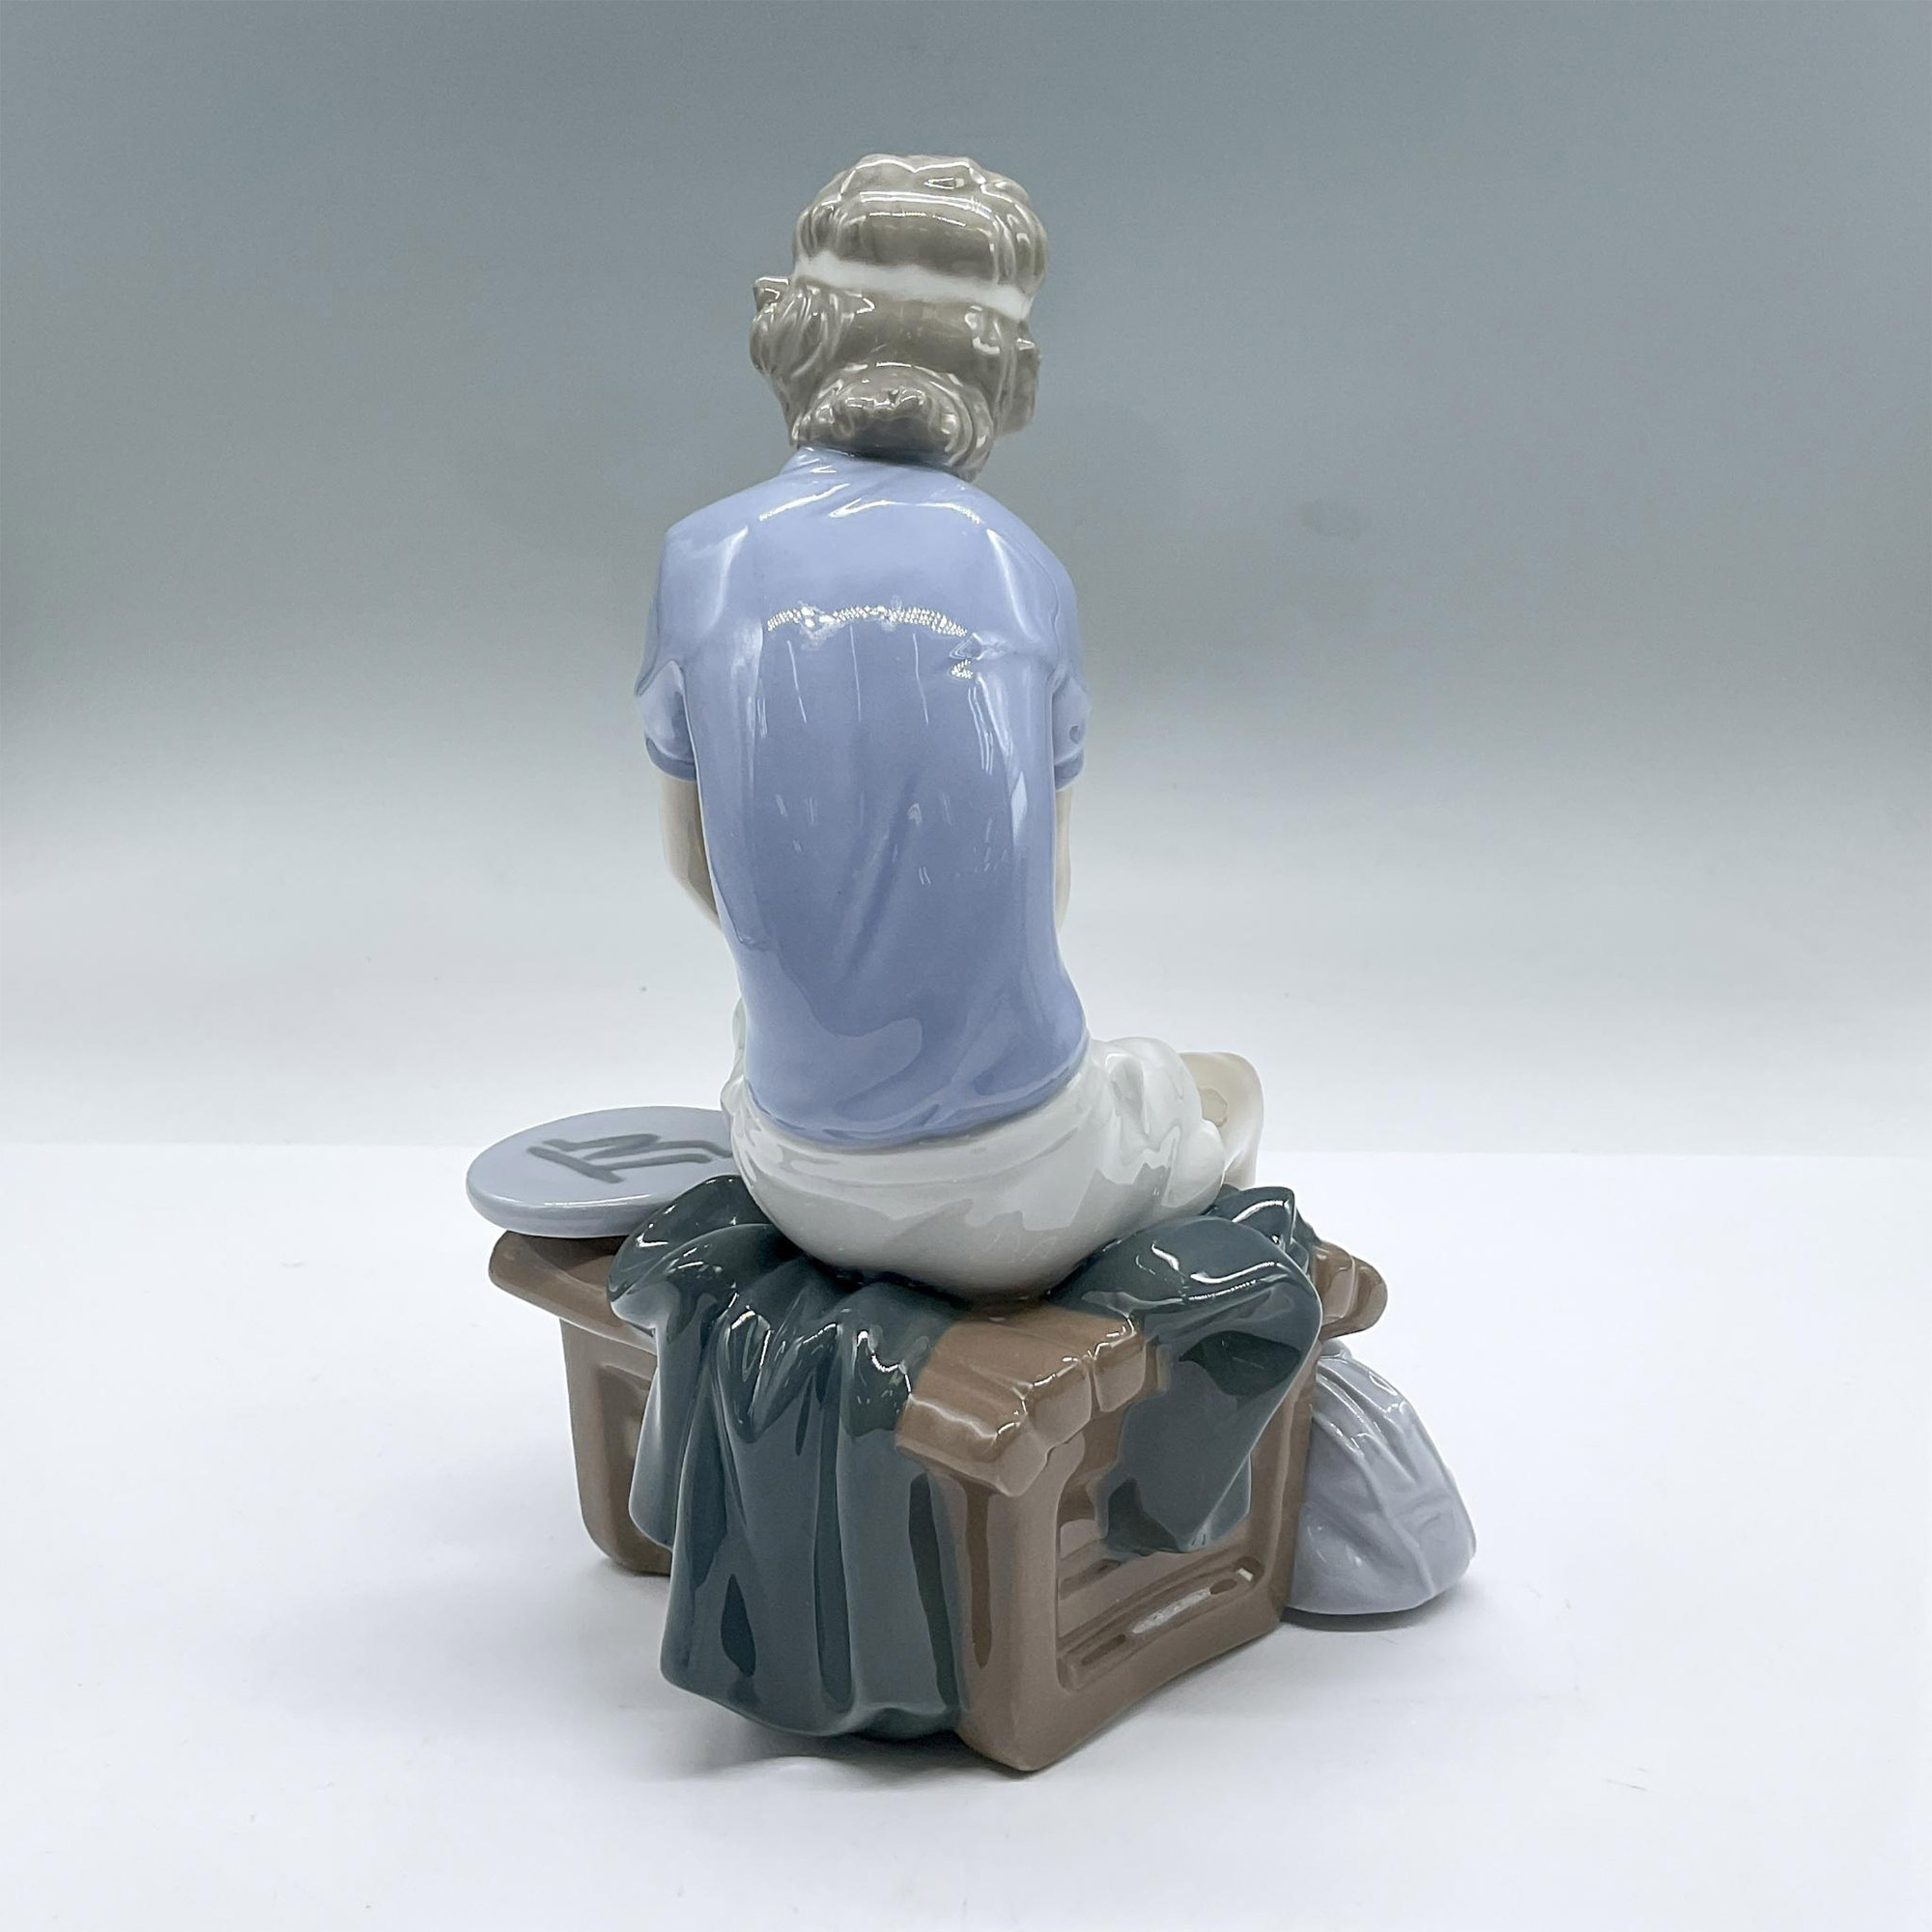 Match Time - Nao by Lladro Porcelain Figurine - Image 3 of 4